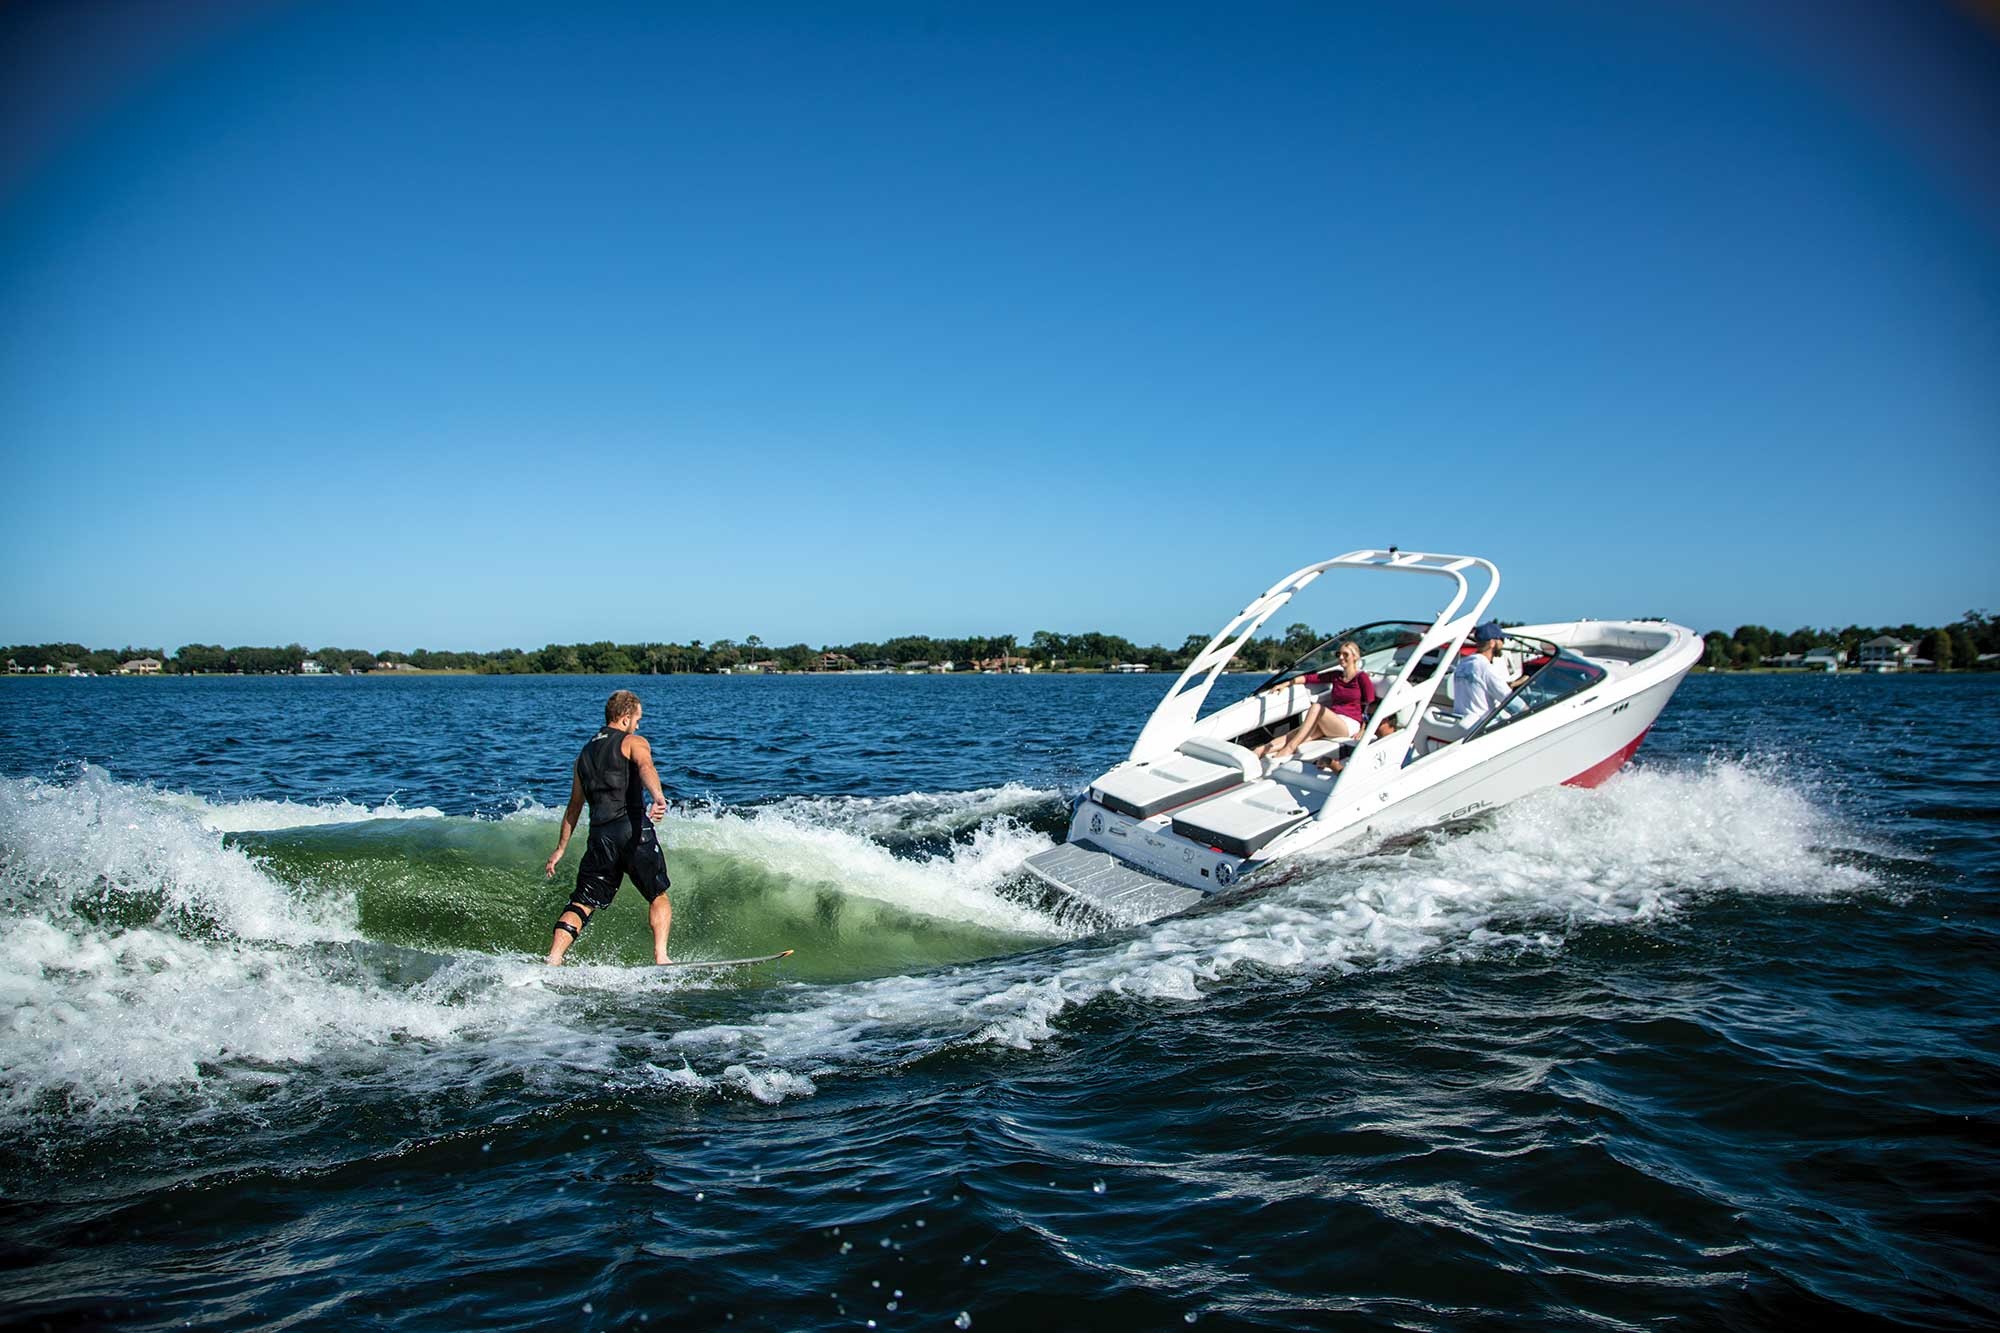 Wakesurfing, Forward drive optimization, Boating mag's tips, Ultimate surfing experience, 2000x1340 HD Desktop